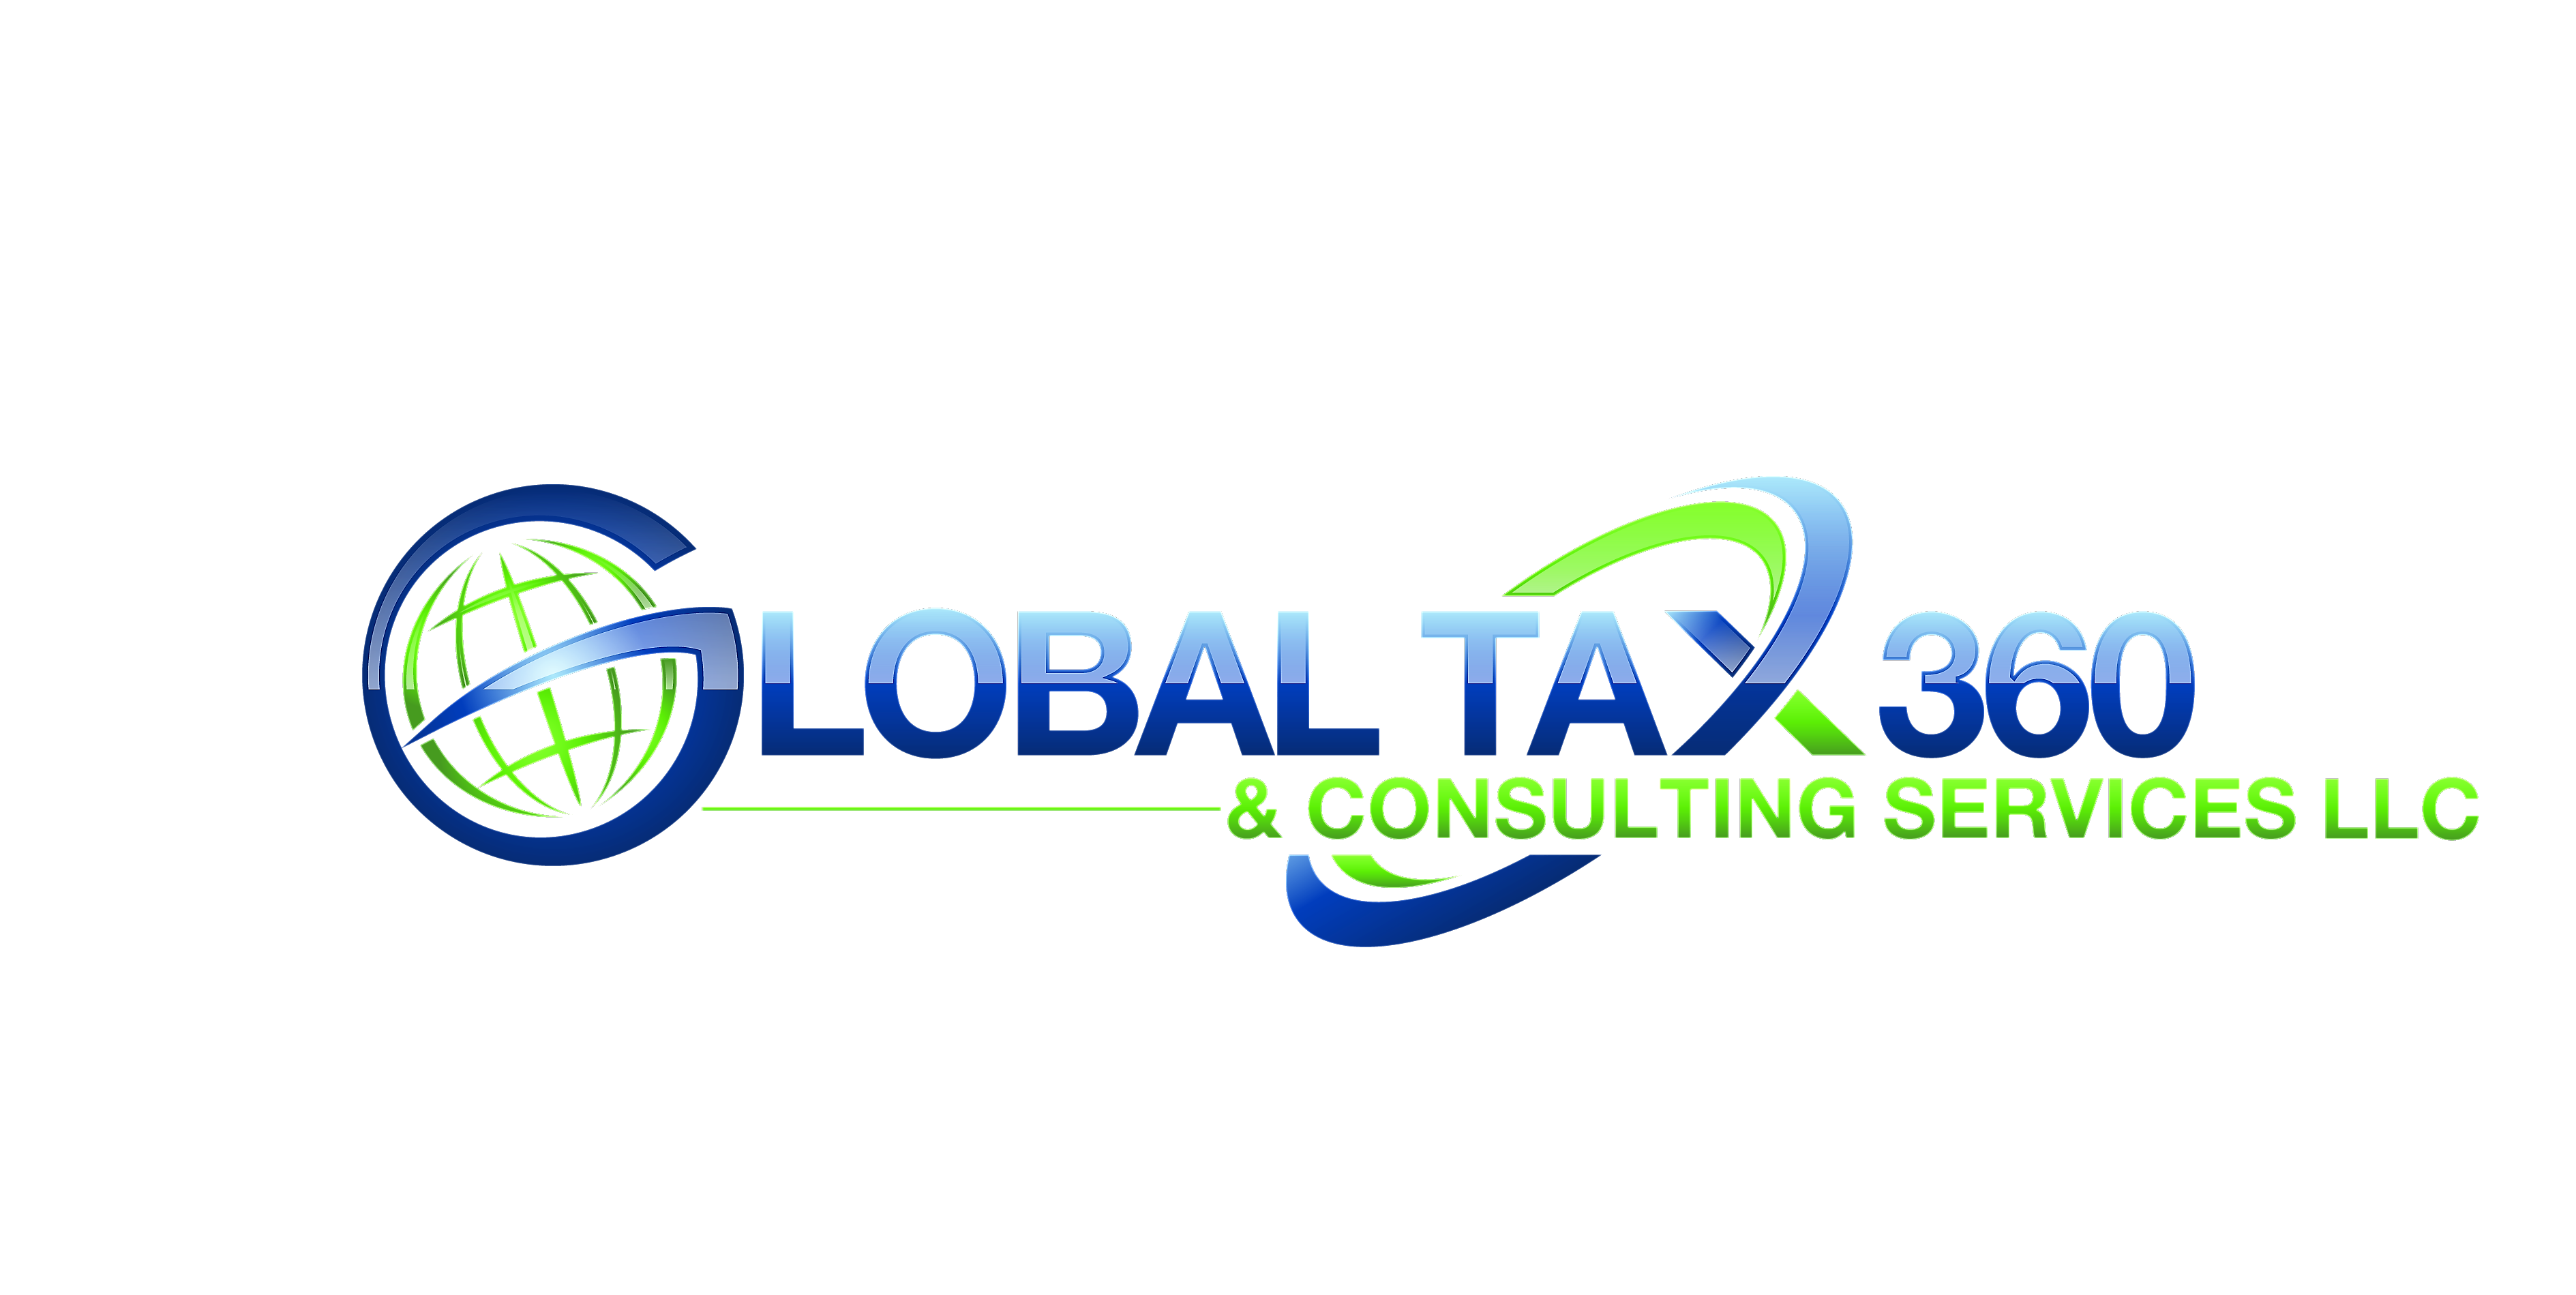 Global Tax 360 & Consulting Services LLC